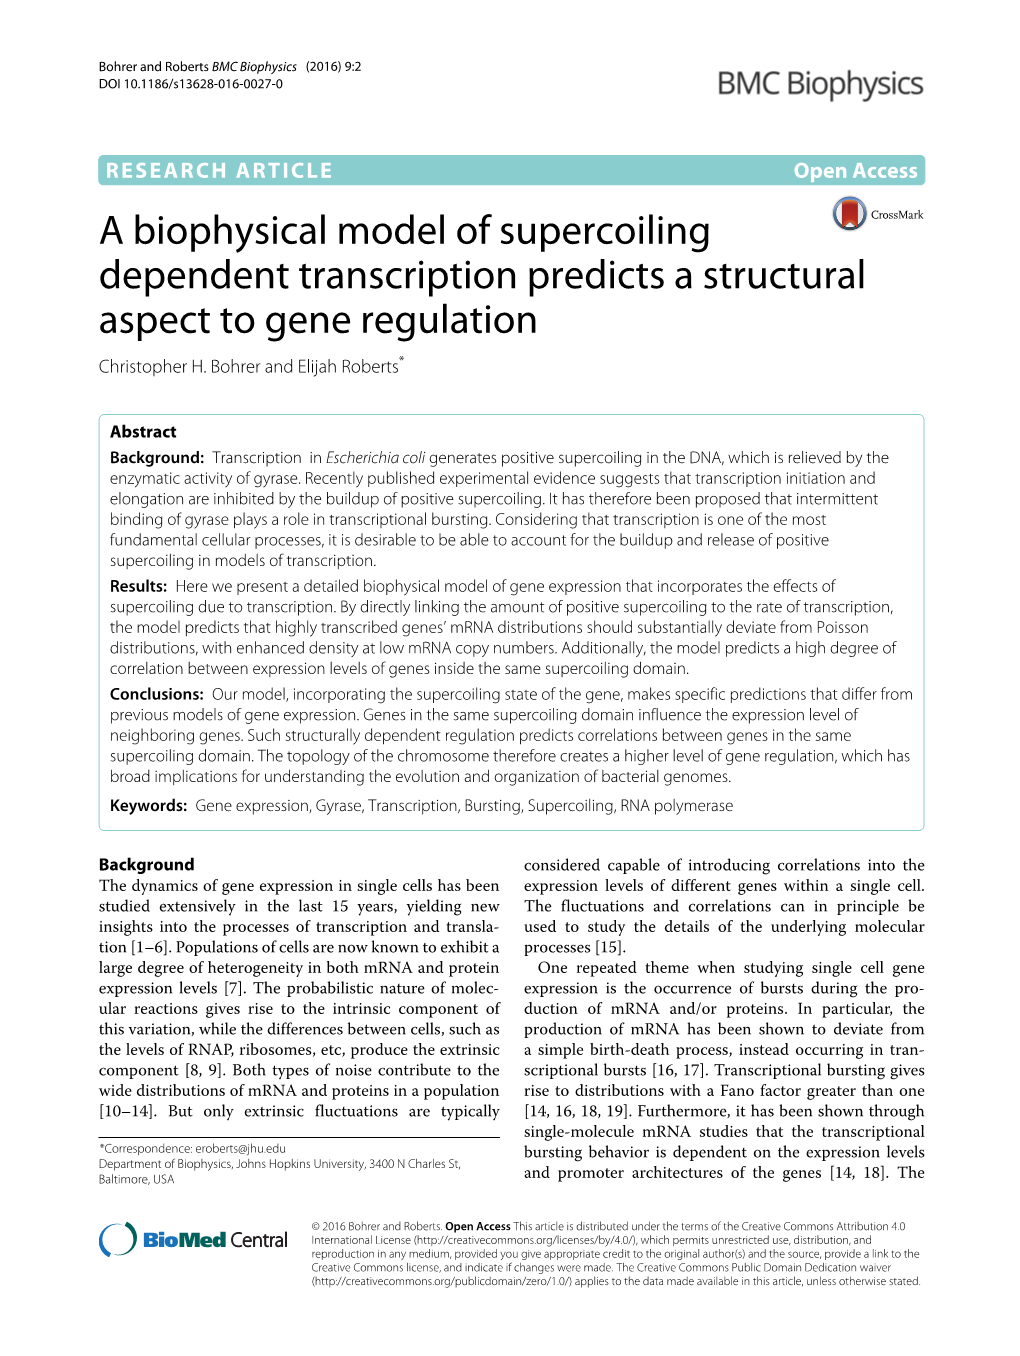 A Biophysical Model of Supercoiling Dependent Transcription Predicts a Structural Aspect to Gene Regulation Christopher H